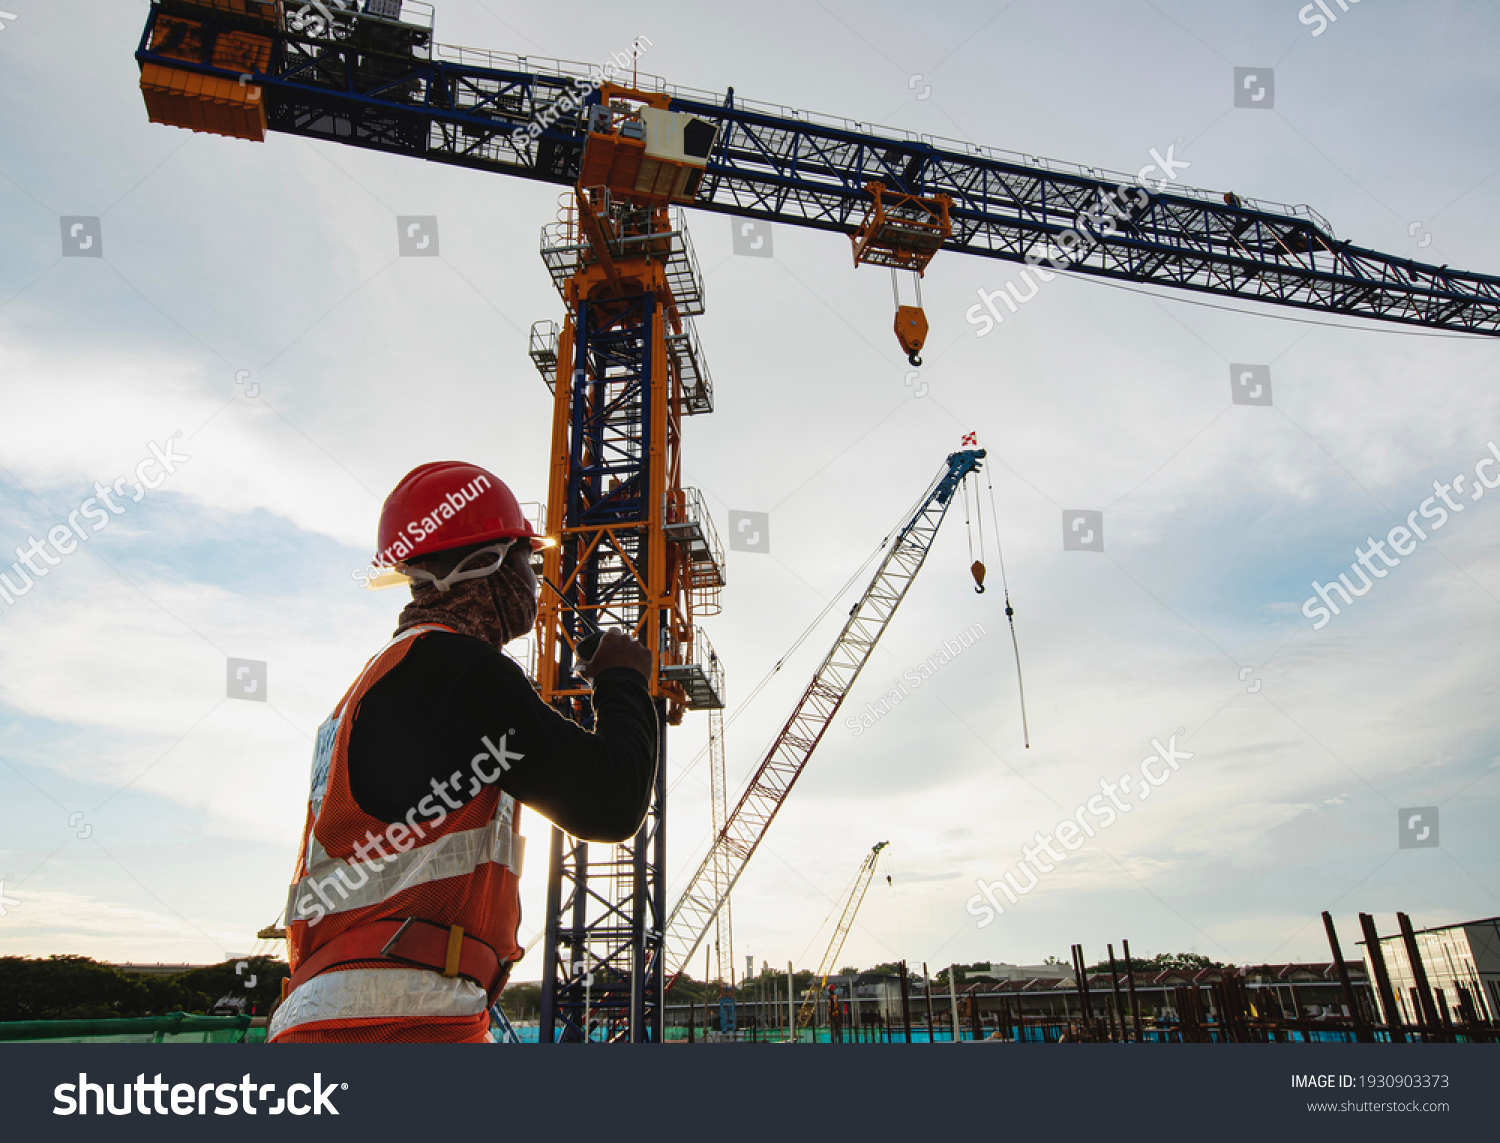  Rigger signal crane at construction site with walkie;talkie  #1930903373